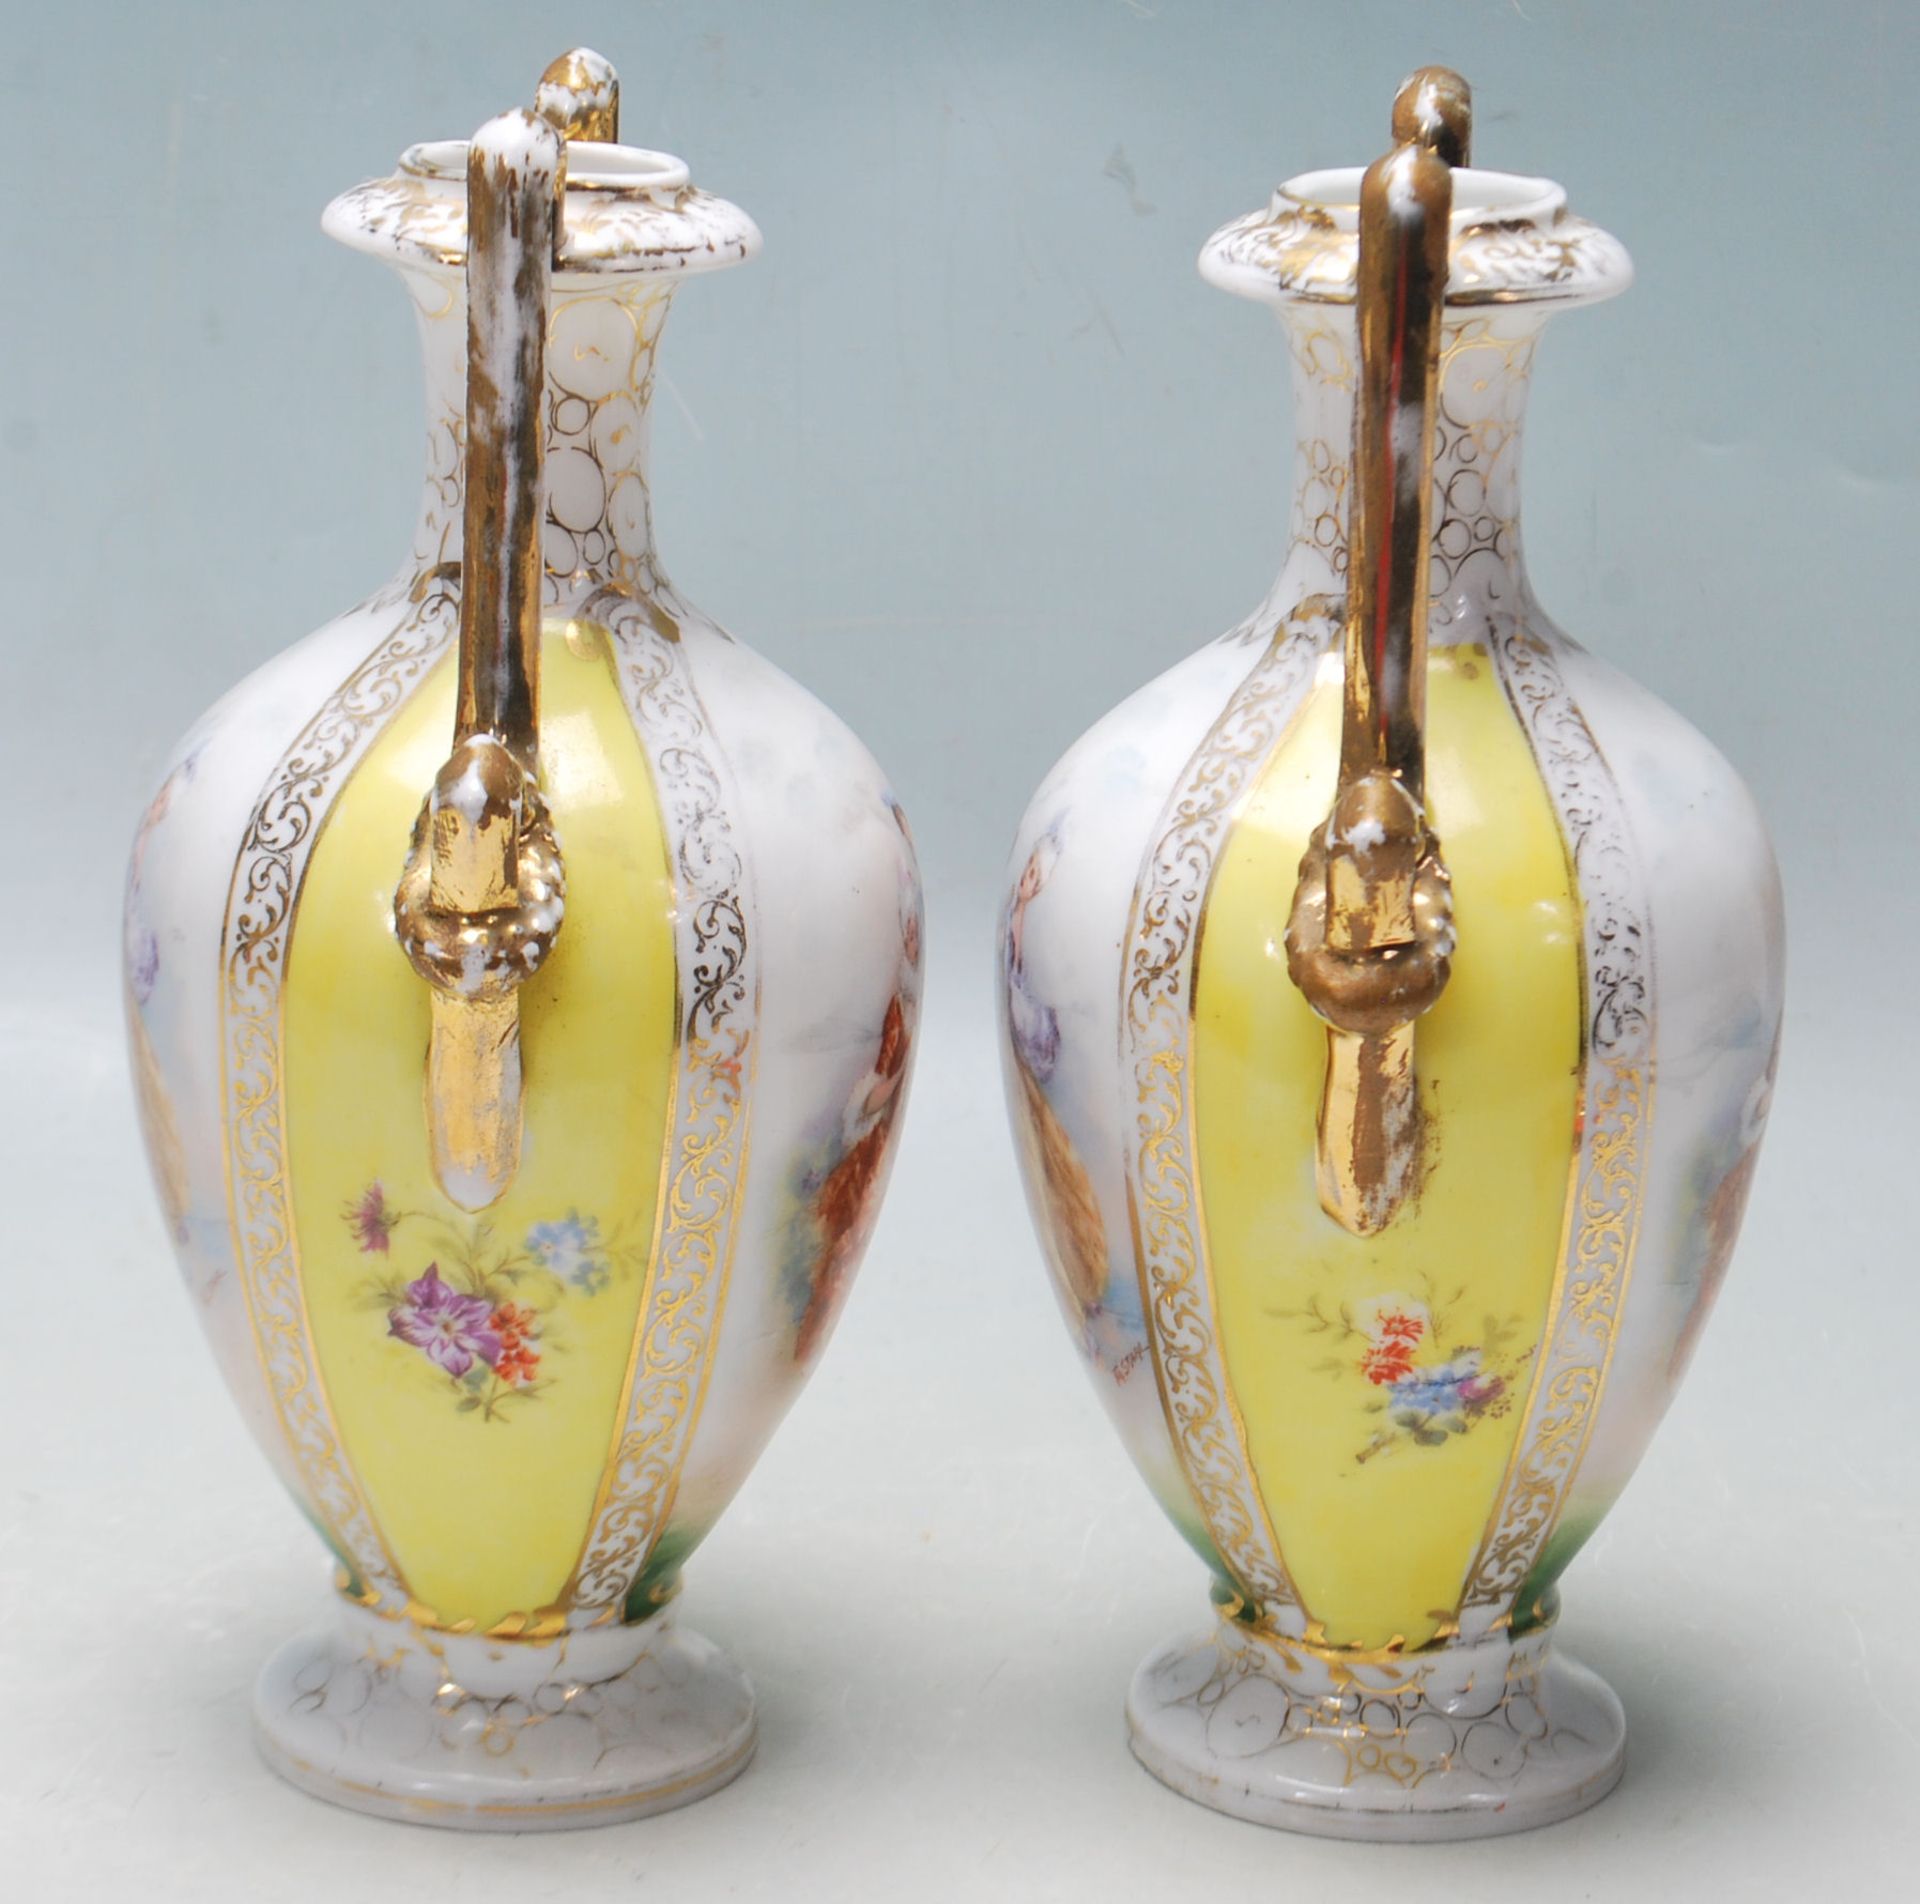 A PAIR OF GERMAN VASES BY VON SCHIERHOLZ 1900C - C.G. SCHIERHOLZ & SON - PAITED BY FR STAHL - Image 4 of 11